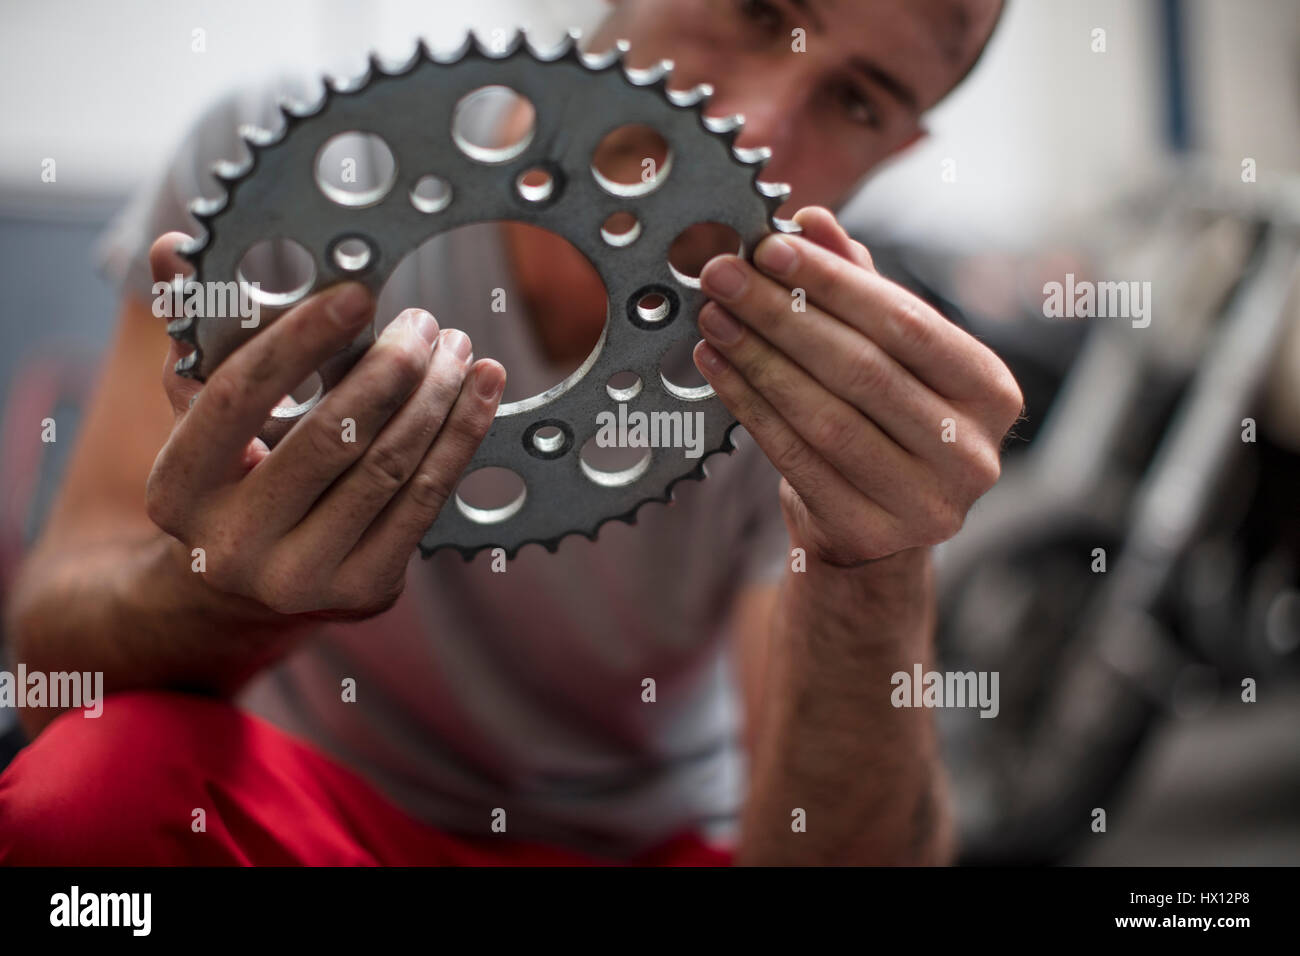 Mechanic in workshop holding a sprocket Stock Photo